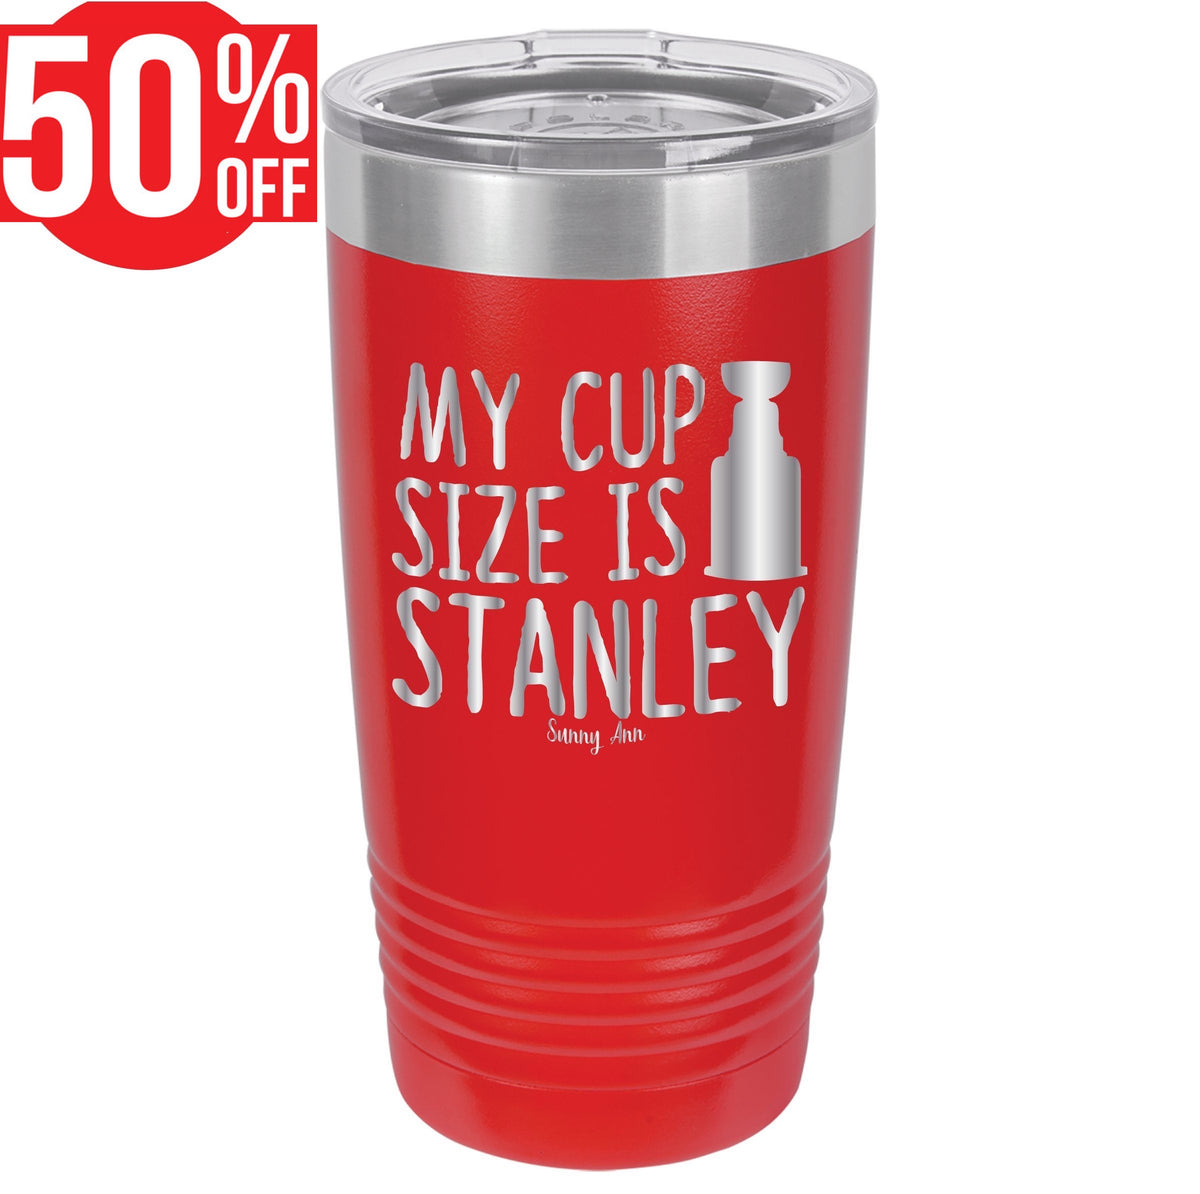 Stanley cups • Compare (100+ products) see price now »